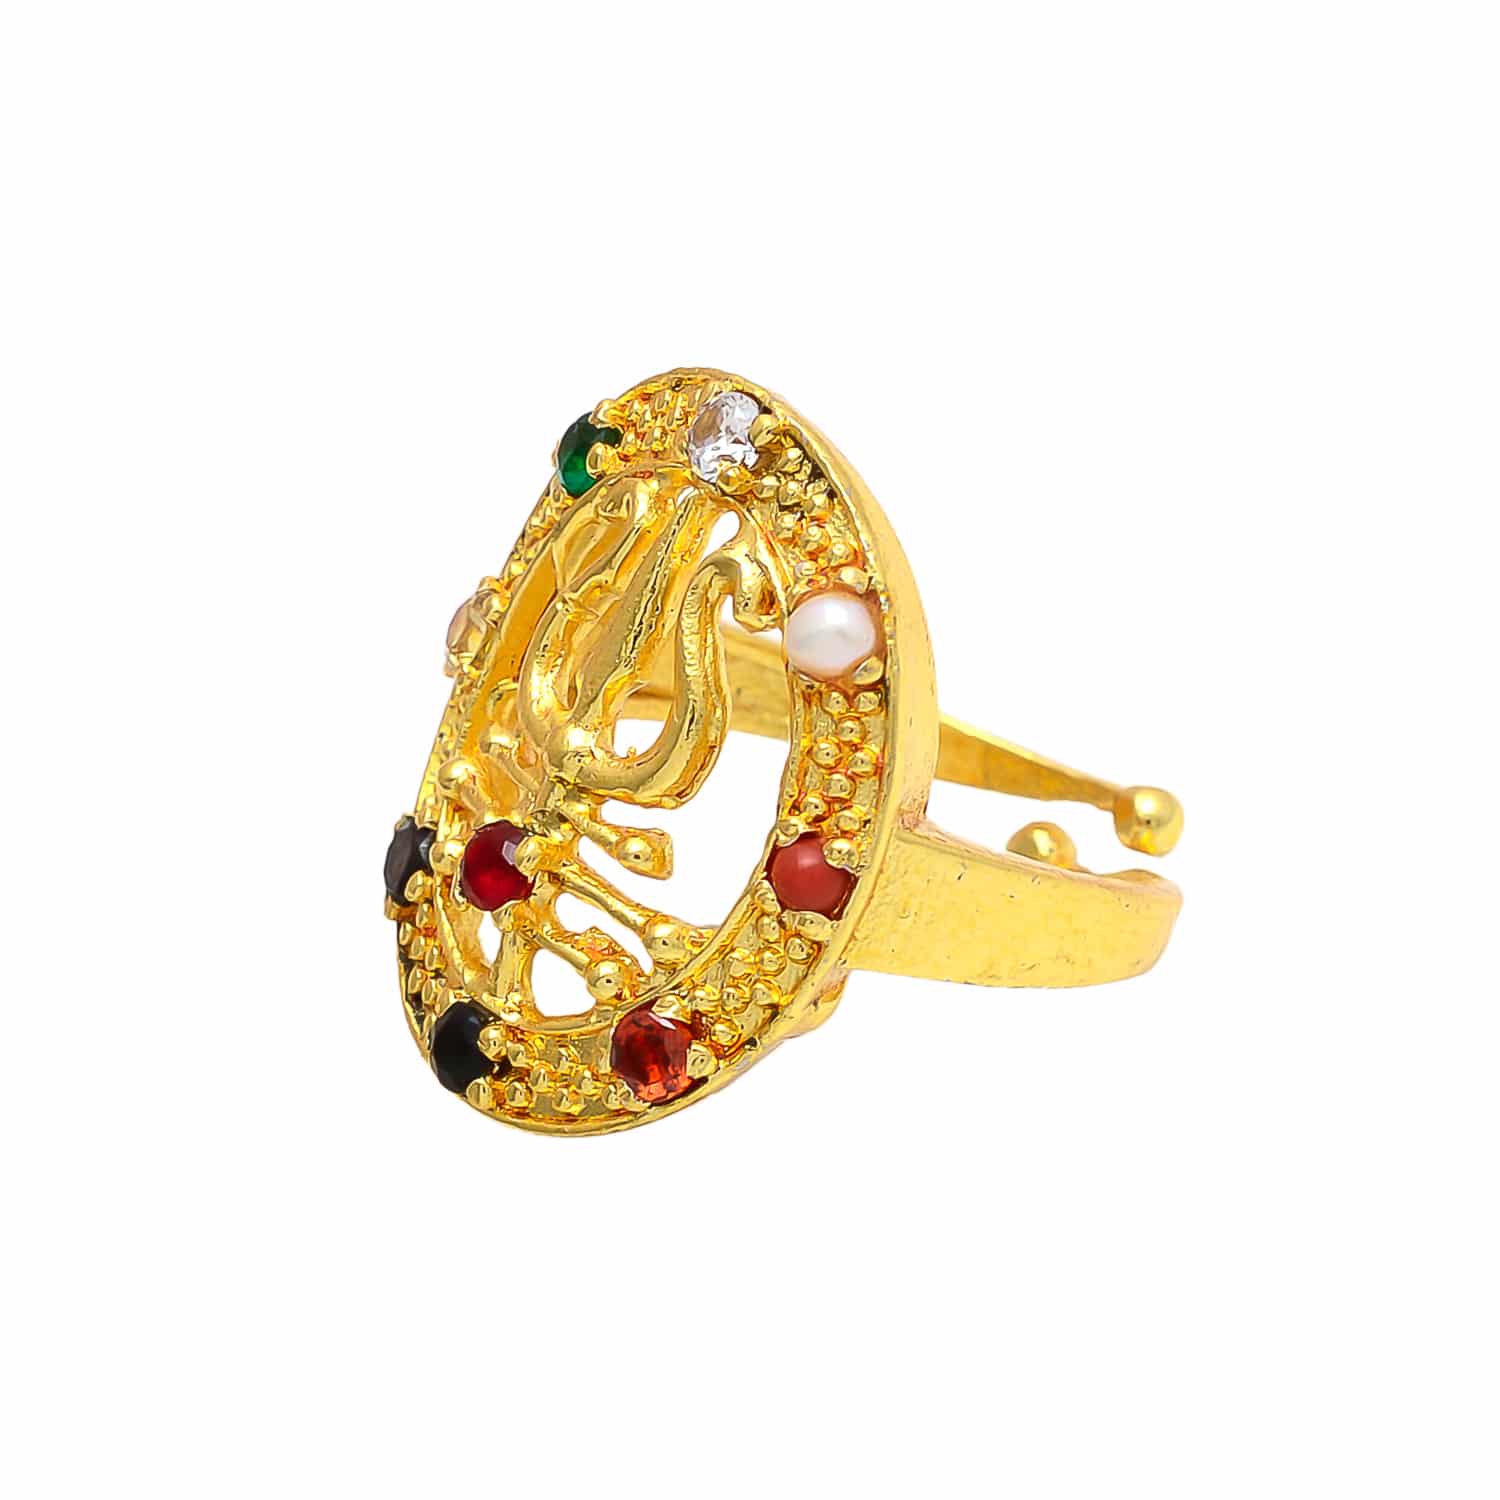 22K Gold 'Adjustable' Ring For Women With Color Stone - 235-GR7382 in 8.750  Grams